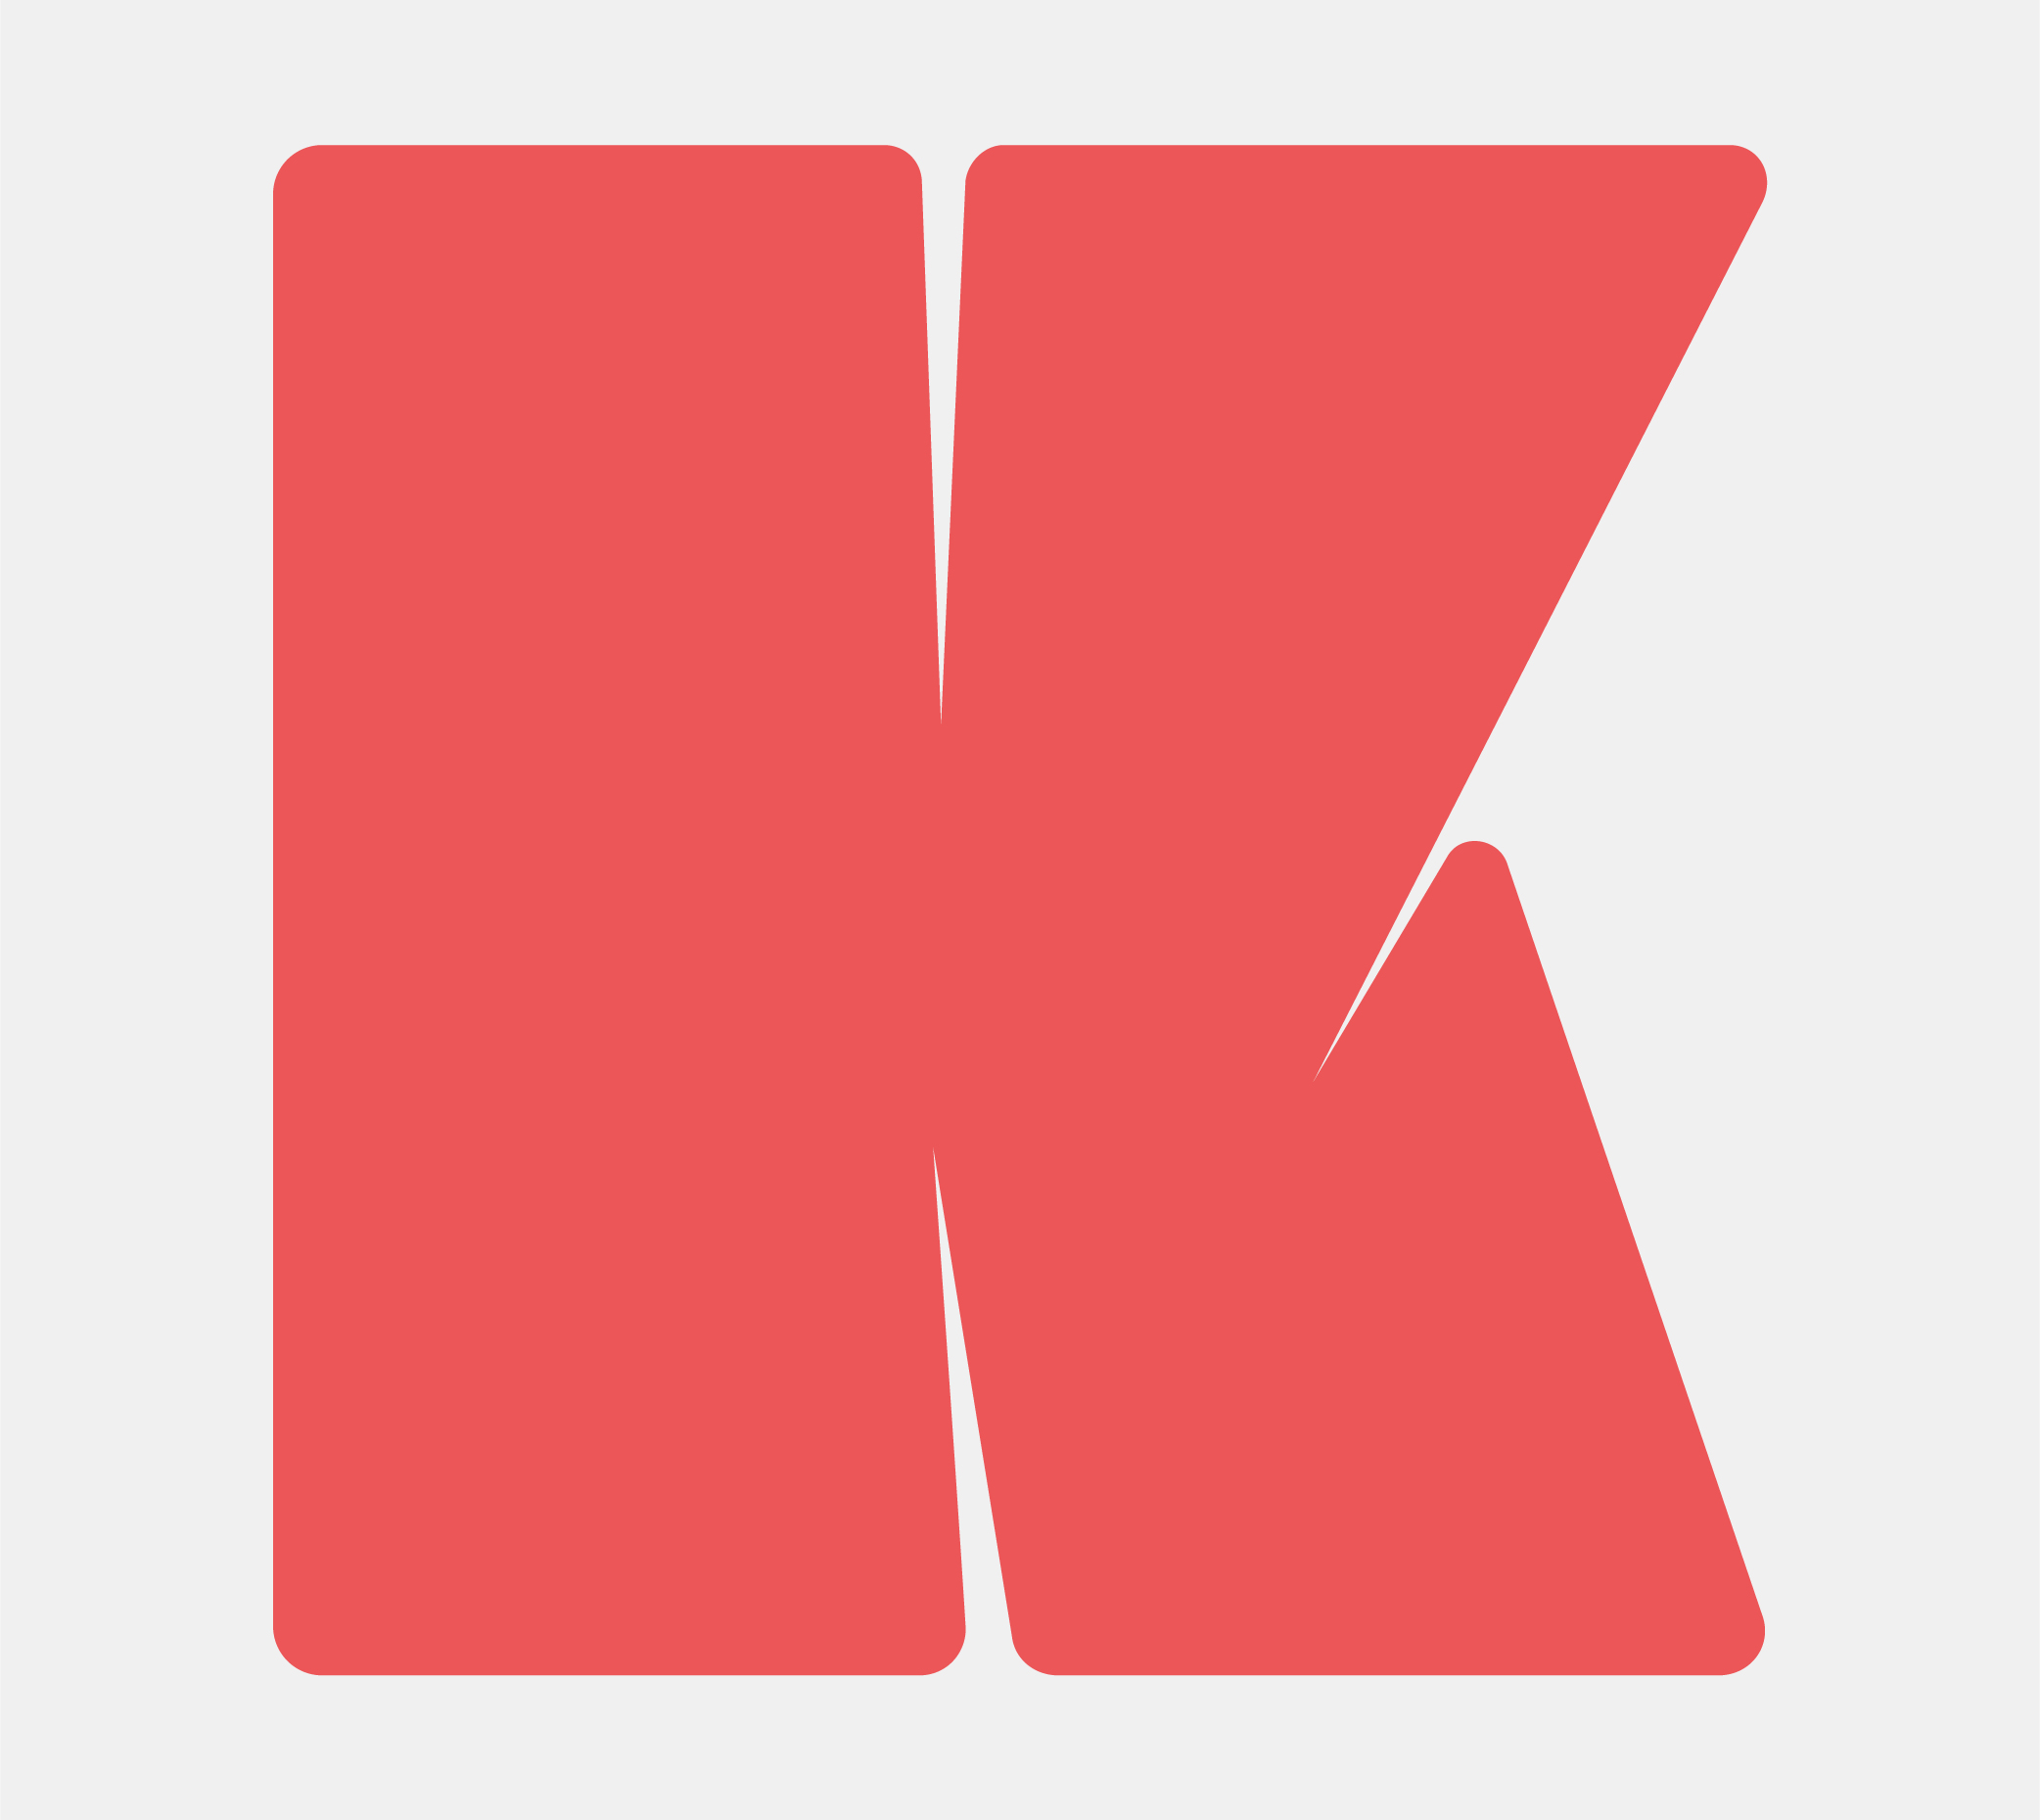 Typography of the letter K from Krease Display